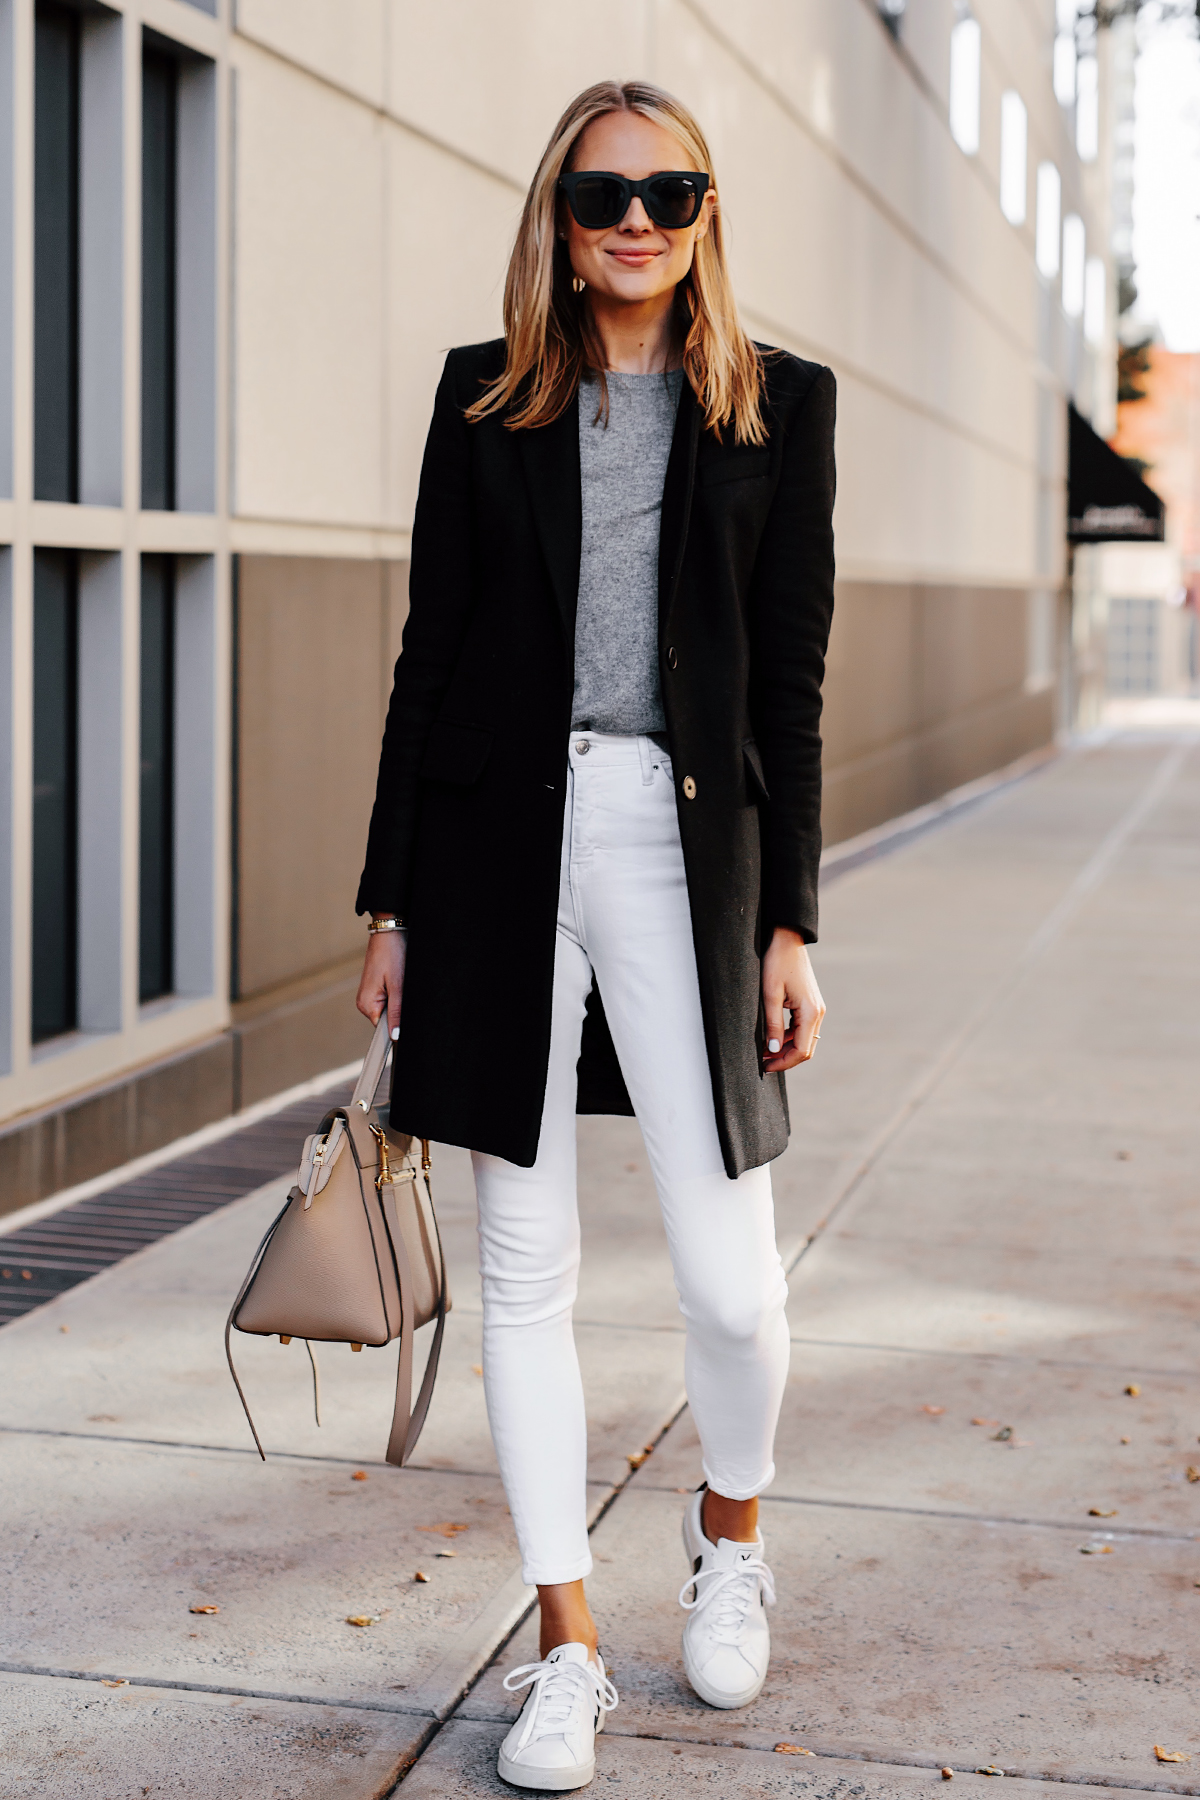 Winter Coat with Sneakers | Fashion Jackson